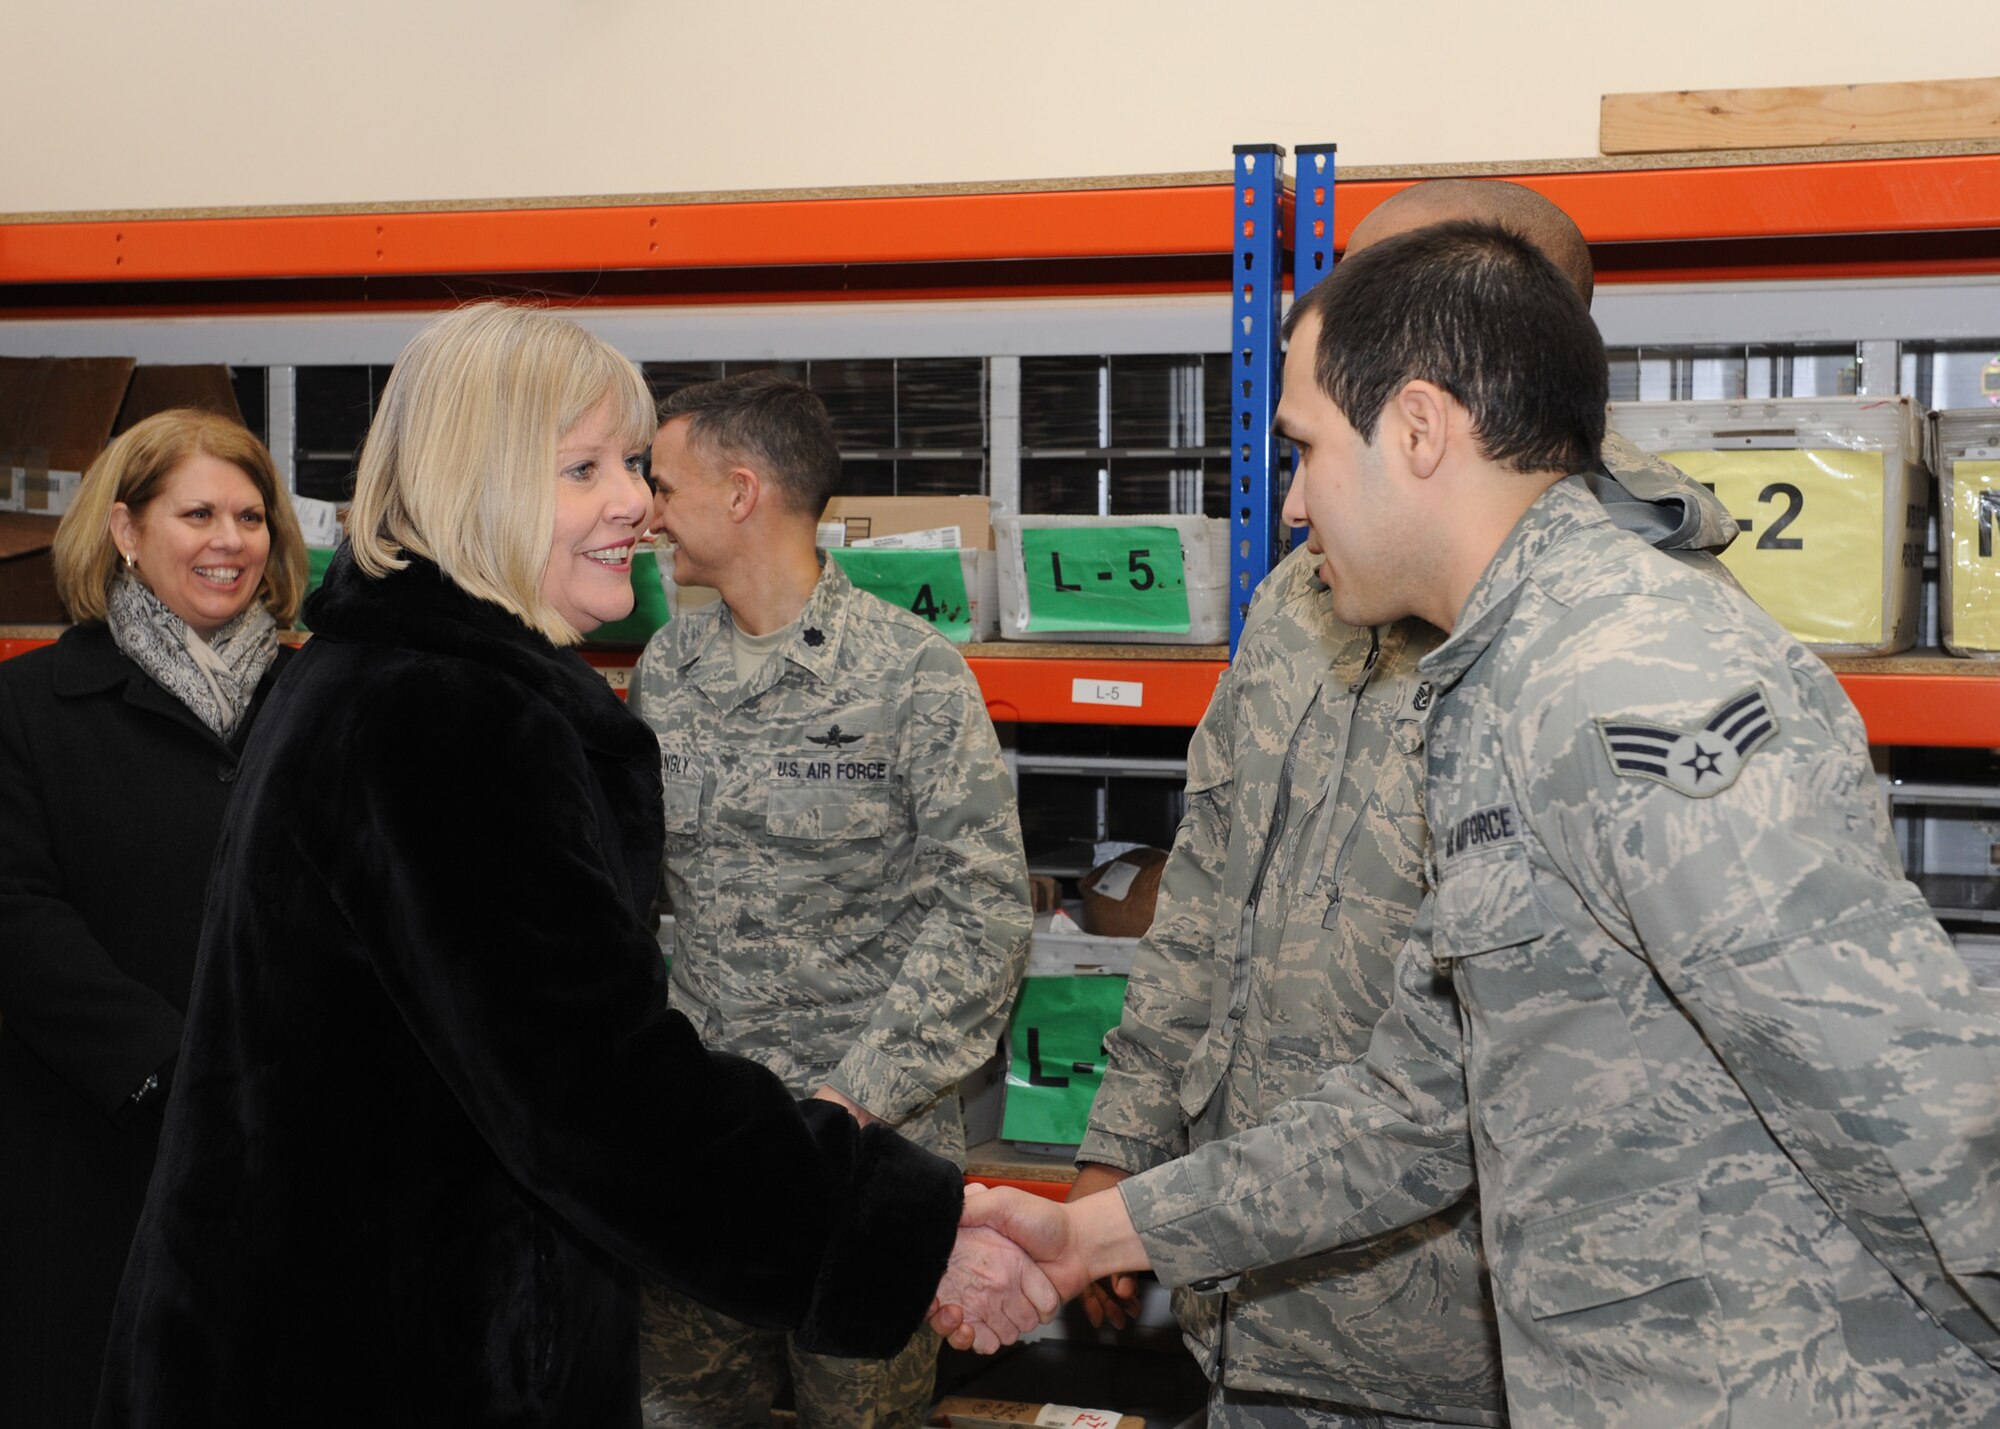 RAF MILDENHALL, England -- Suzie Schwartz, wife of Air Force Chief of Staff Gen. Norton Schwartz meets Senior Airman Josh Morales, 100th Communications Squadron, during a tour of the RAF Mildenhall Post Office here Feb. 10, 2011. She and the general visited RAF Mildenhall to attend an annual awards ceremony and meet with base leadership. (U.S. Air Force photo/Tech. Sgt. Neil X. Joiner) 
